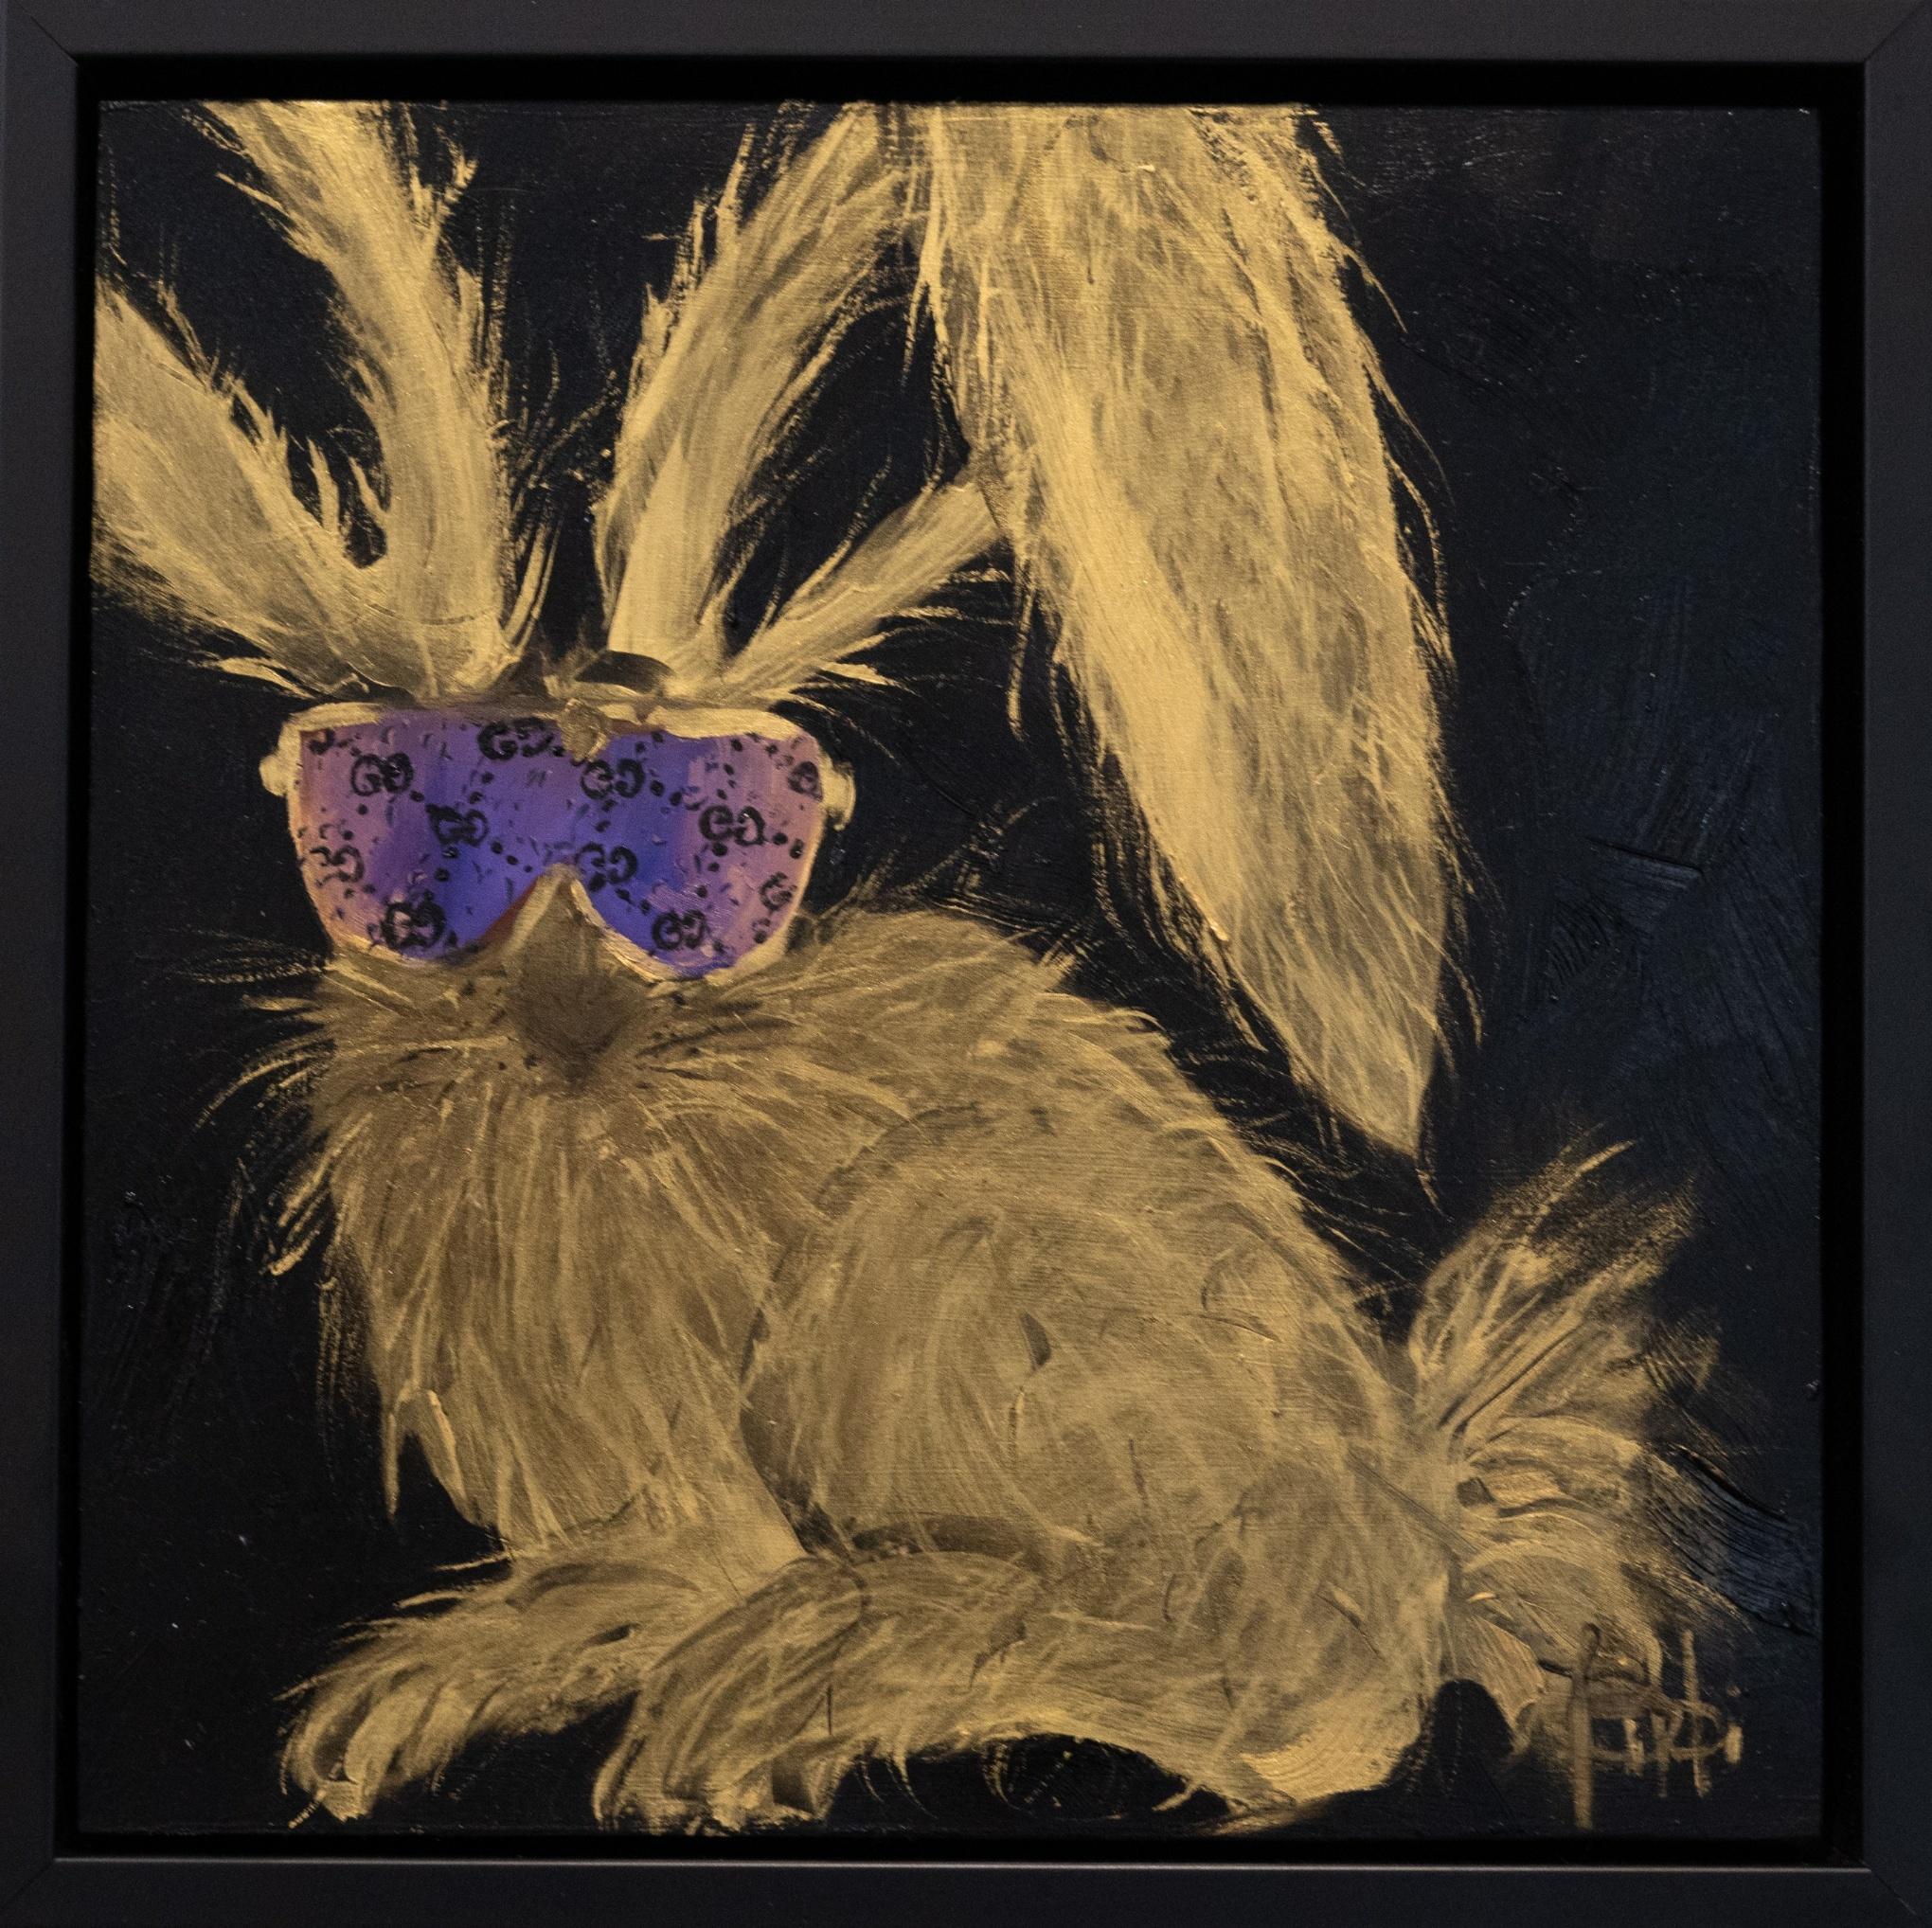 Golden Hare with  Gucci Sunglasses  10x10  Contemporary Art  Framed 